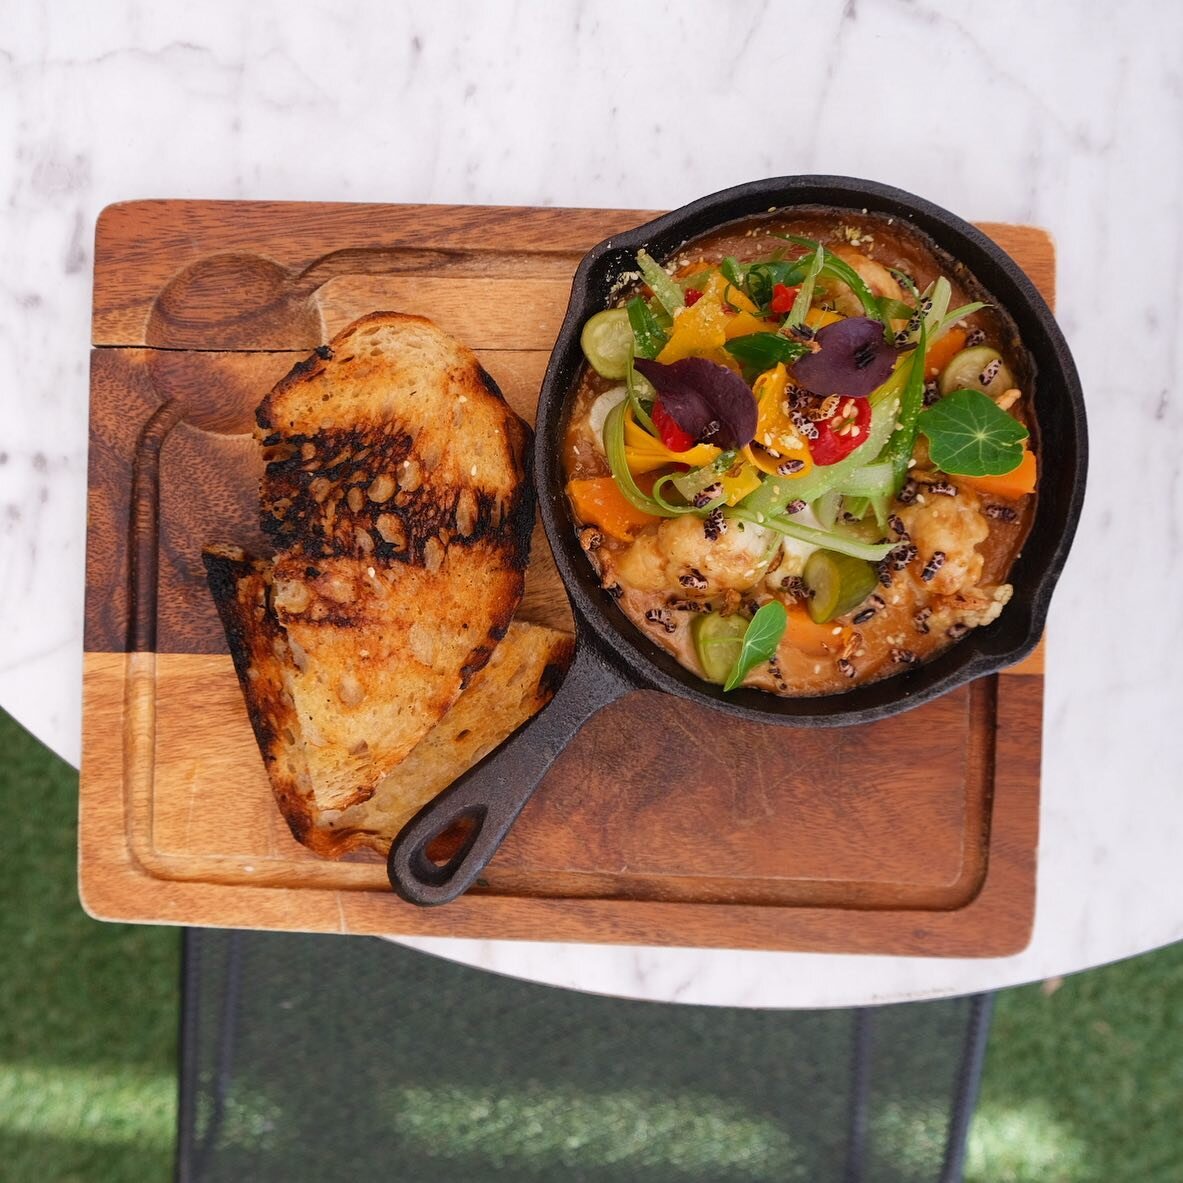 Satay Baked Eggs in our outdoor dining space today ☀️ Prefect way to top off your weekend 

.⁣
.⁣
.⁣
#breakfastinmelbourne #foodblogger #melbourne #melbourneblogger #melbournebreakfast #melbournebrunch #melbournecafe #melbourneeats #melbournefood #me